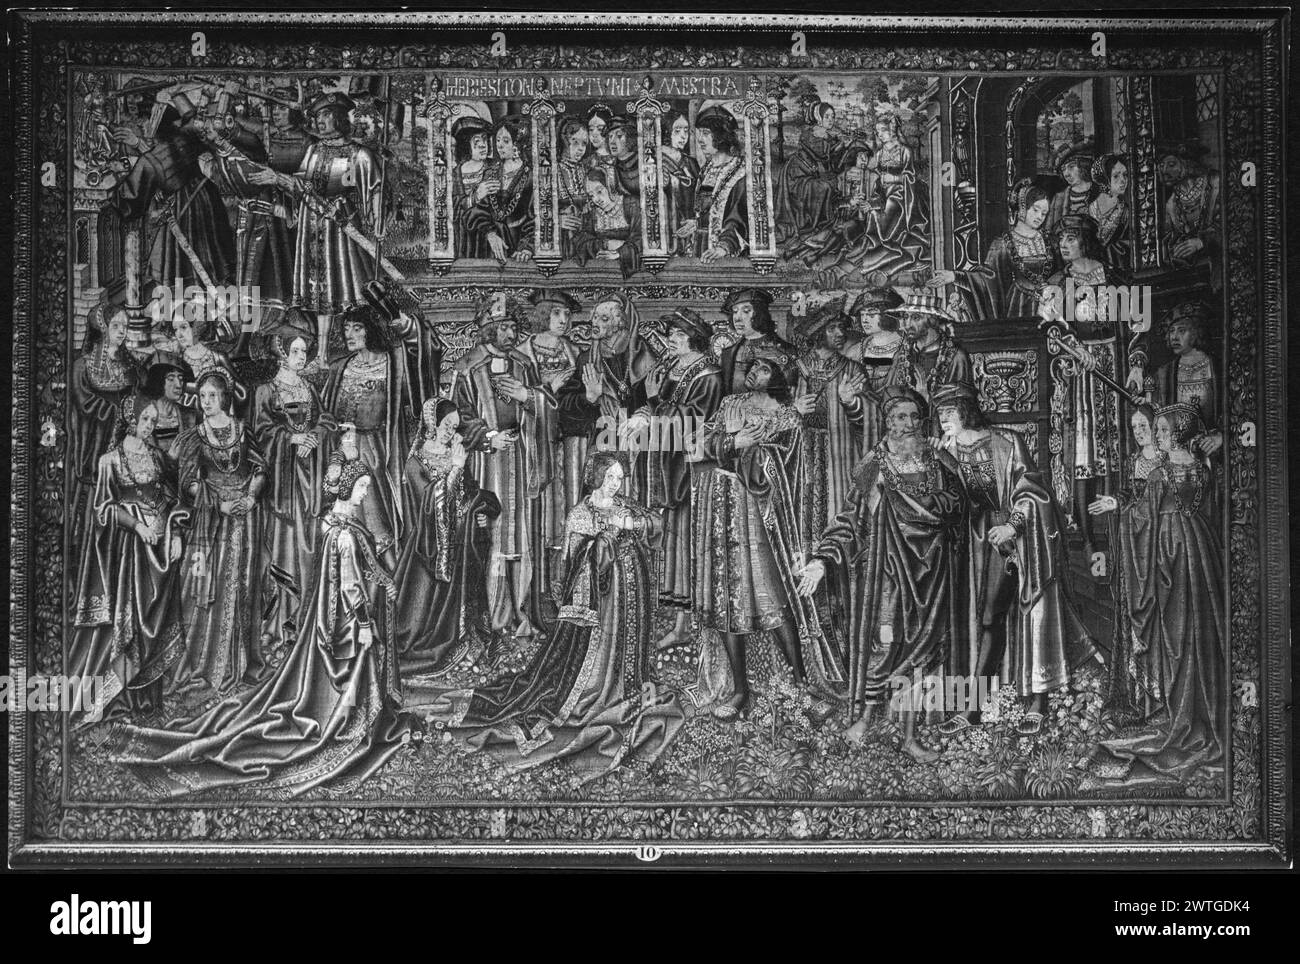 Supplication of Mestra. unknown c. 1515-1520 Tapestry Dimensions: H 359 x W 562 cm Tapestry Materials/Techniques: unknown Culture: Southern Netherlands Ownership History: Somzée coll. Sold to the Musées Royaux des Beaux-Arts de Belgique in 1904. Housed at the Palais Royal de Bruxelles since 1935. Belgium, Brabant, Brussels, Musées royaux des beaux-arts de belgique, accno. 5049. Inscriptions: Inscription in central field, top: HIERESITON.NEPTUNI.MESTRA Mestra, kneeling with hands joined & surrounded by spectators, entreats her father, Erysichthon (R) not to sell her; or entreats Neptune (Poseid Stock Photo